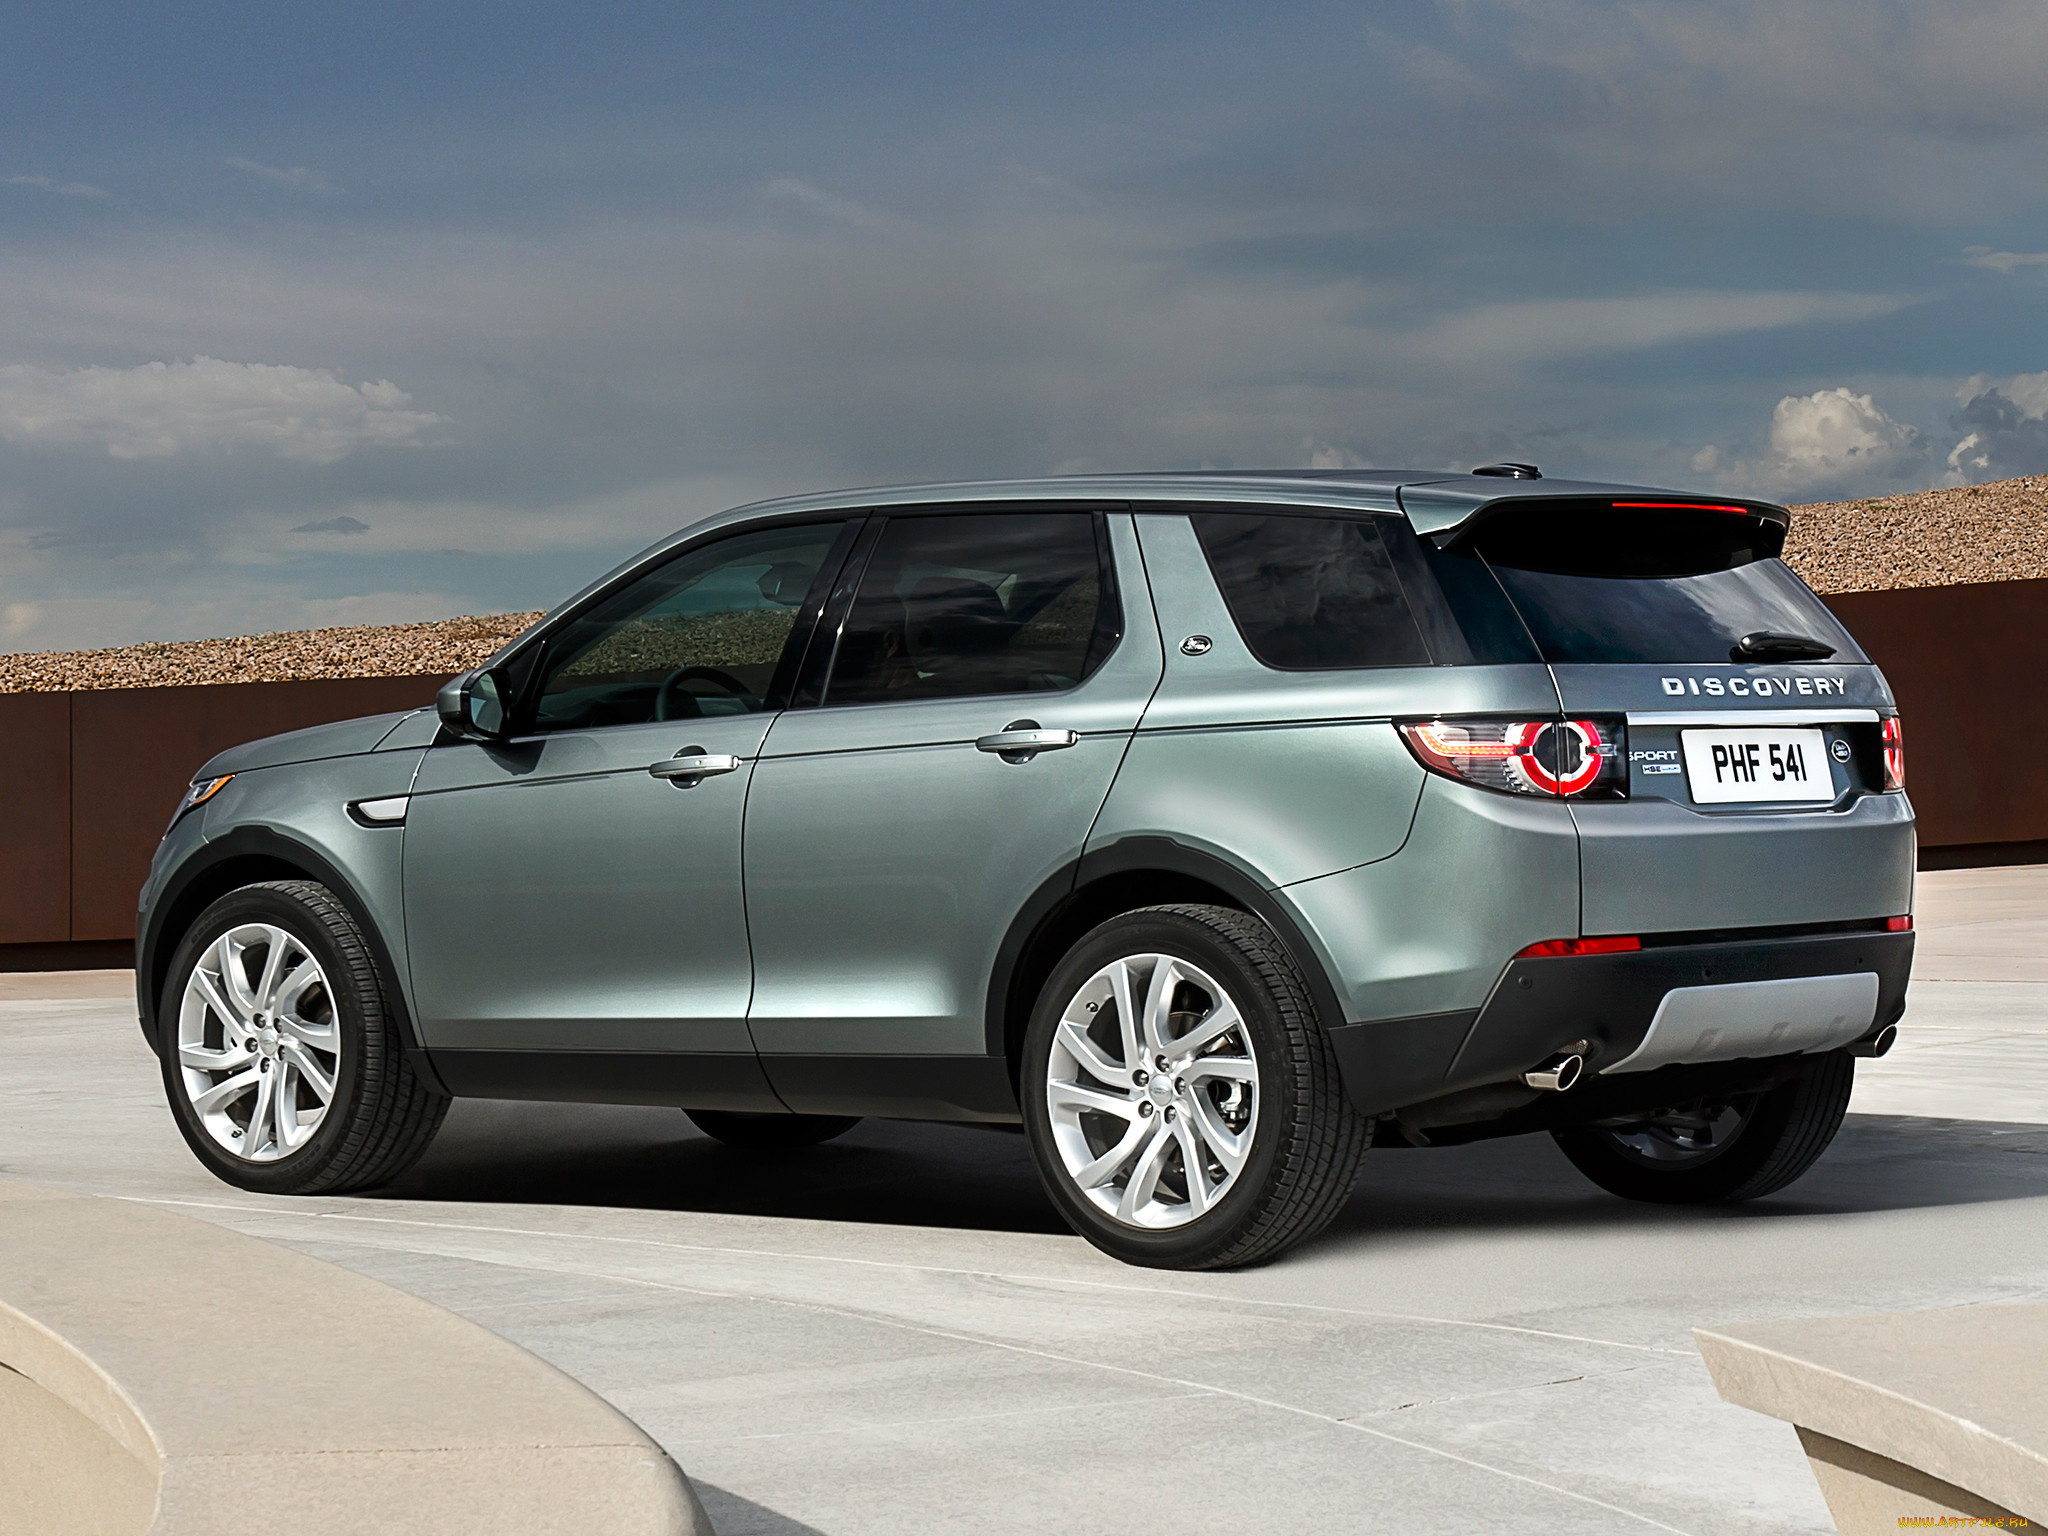 Land rover sport 2015. Land Rover Discovery Sport l550. Land Rover Discovery Sport 2015. Люнд Ровно Дискавери спорт. Range Rover Discovery Sport 2015.